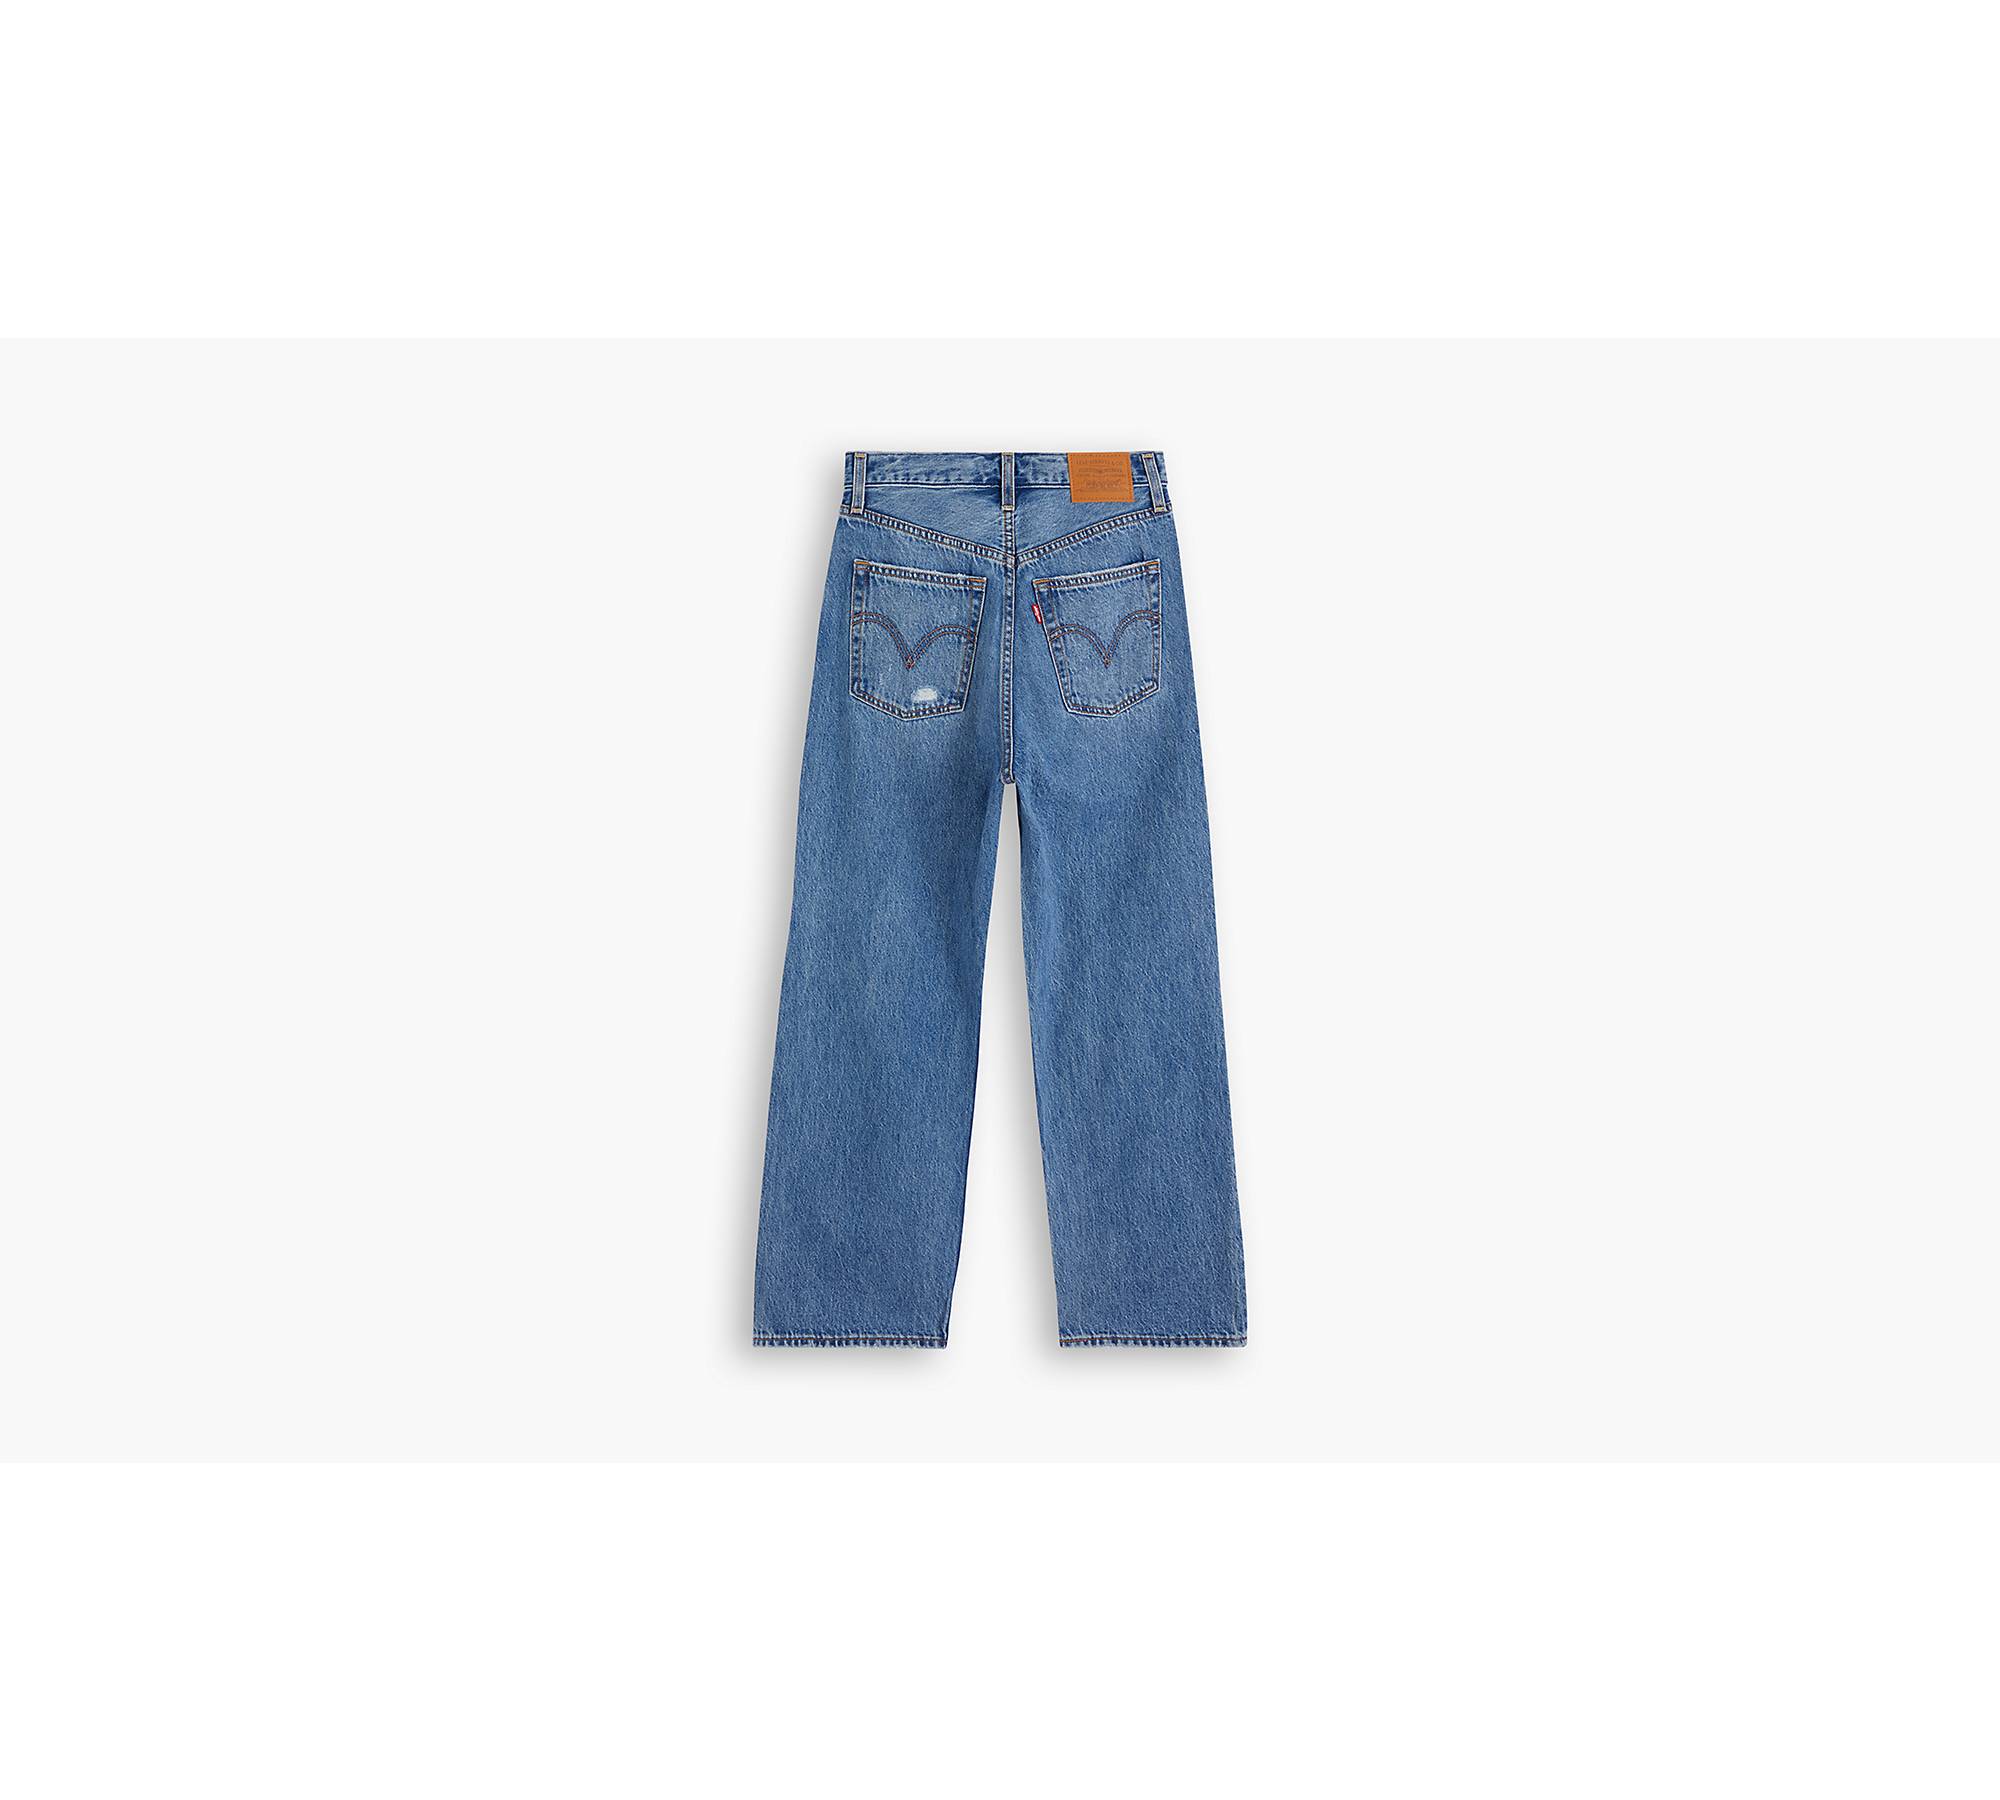 Jeans cropped flare - Pantalóns - BSK Teen